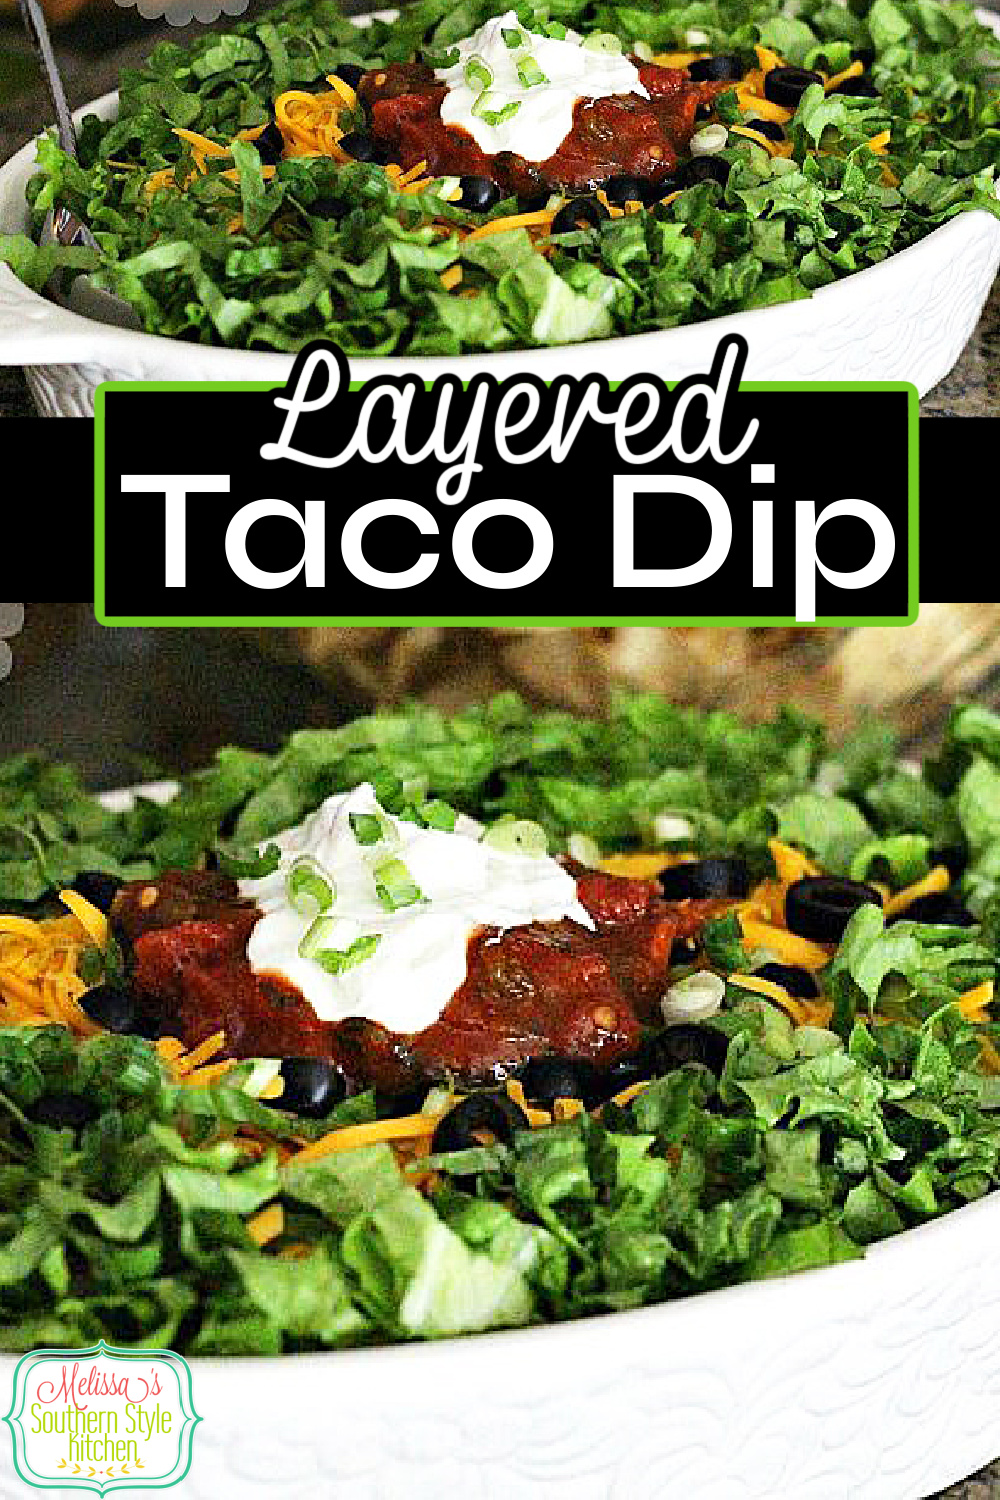 Make this festive Layered Taco Dip then grab a bag, or two, of tortilla chips and snack your way through the game this weekend #tacodip #mexicanfood #gamedayrecipes #appetizers #beandip #tacos #snacks #easytacodip #mexicandip via @melissasssk